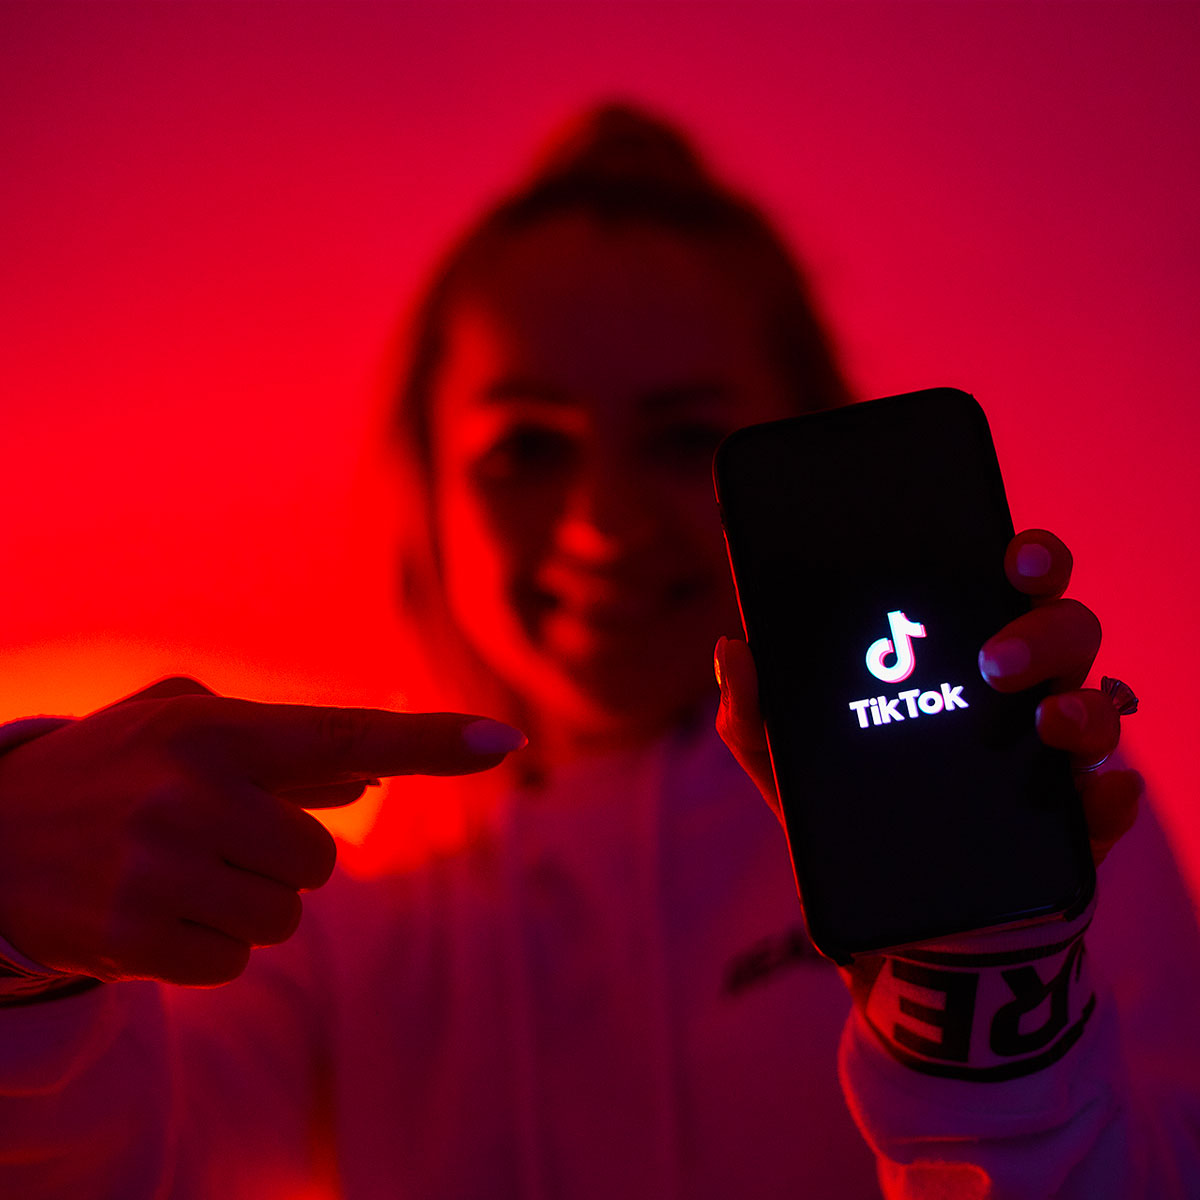 A girl in red background, darkened, tiktok promoting TikTok social network with a smartphone in hand.